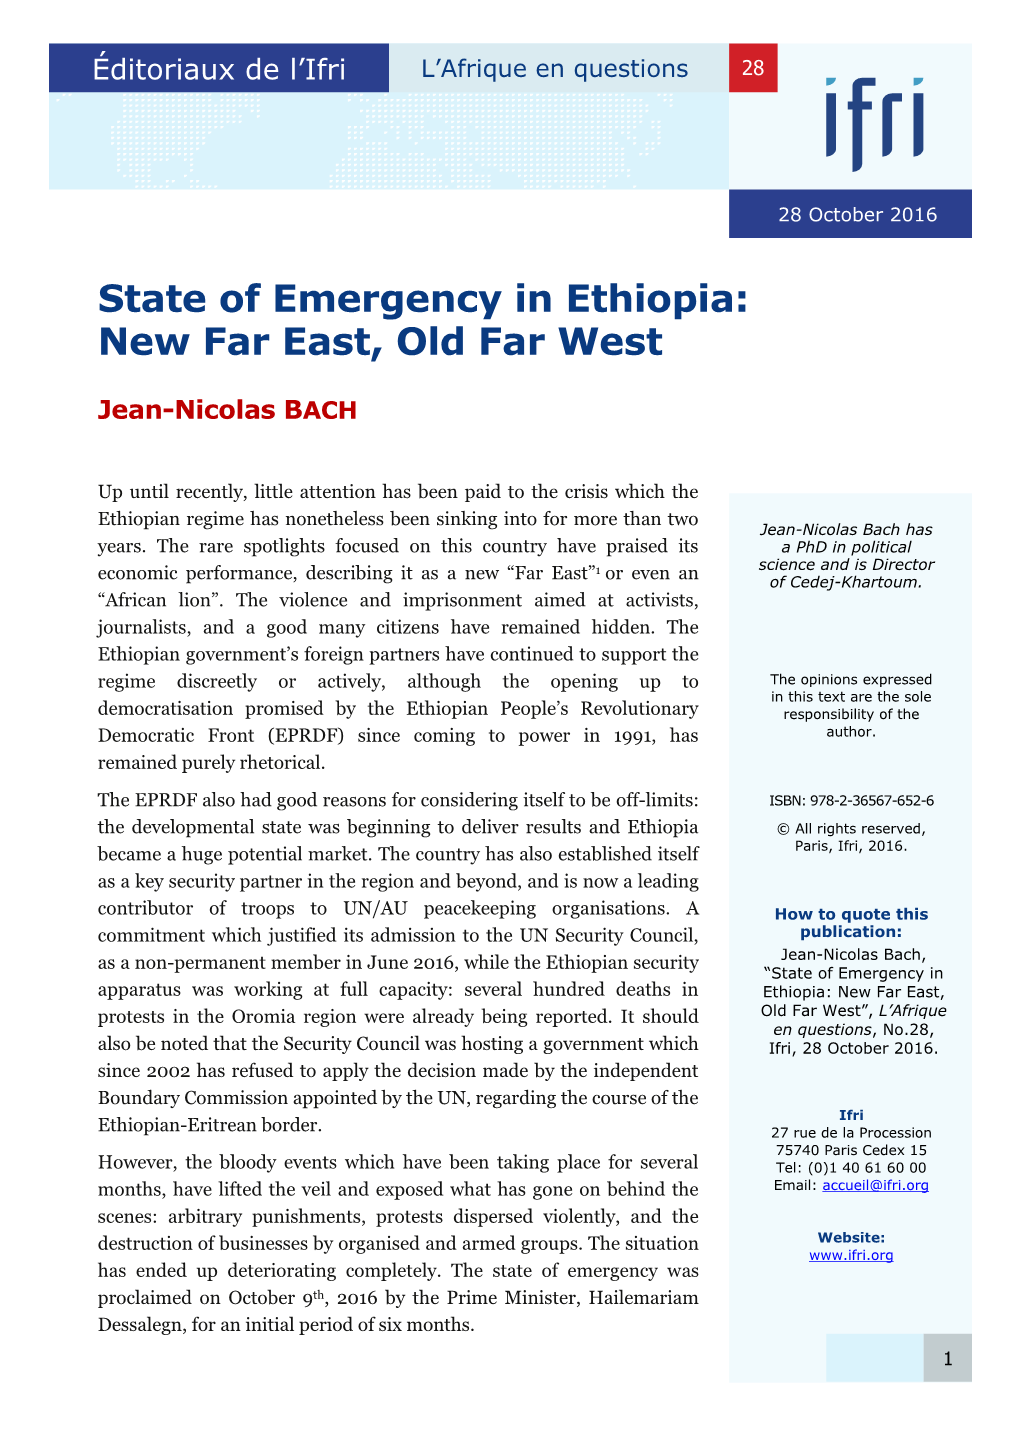 State of Emergency in Ethiopia: New Far East, Old Far West